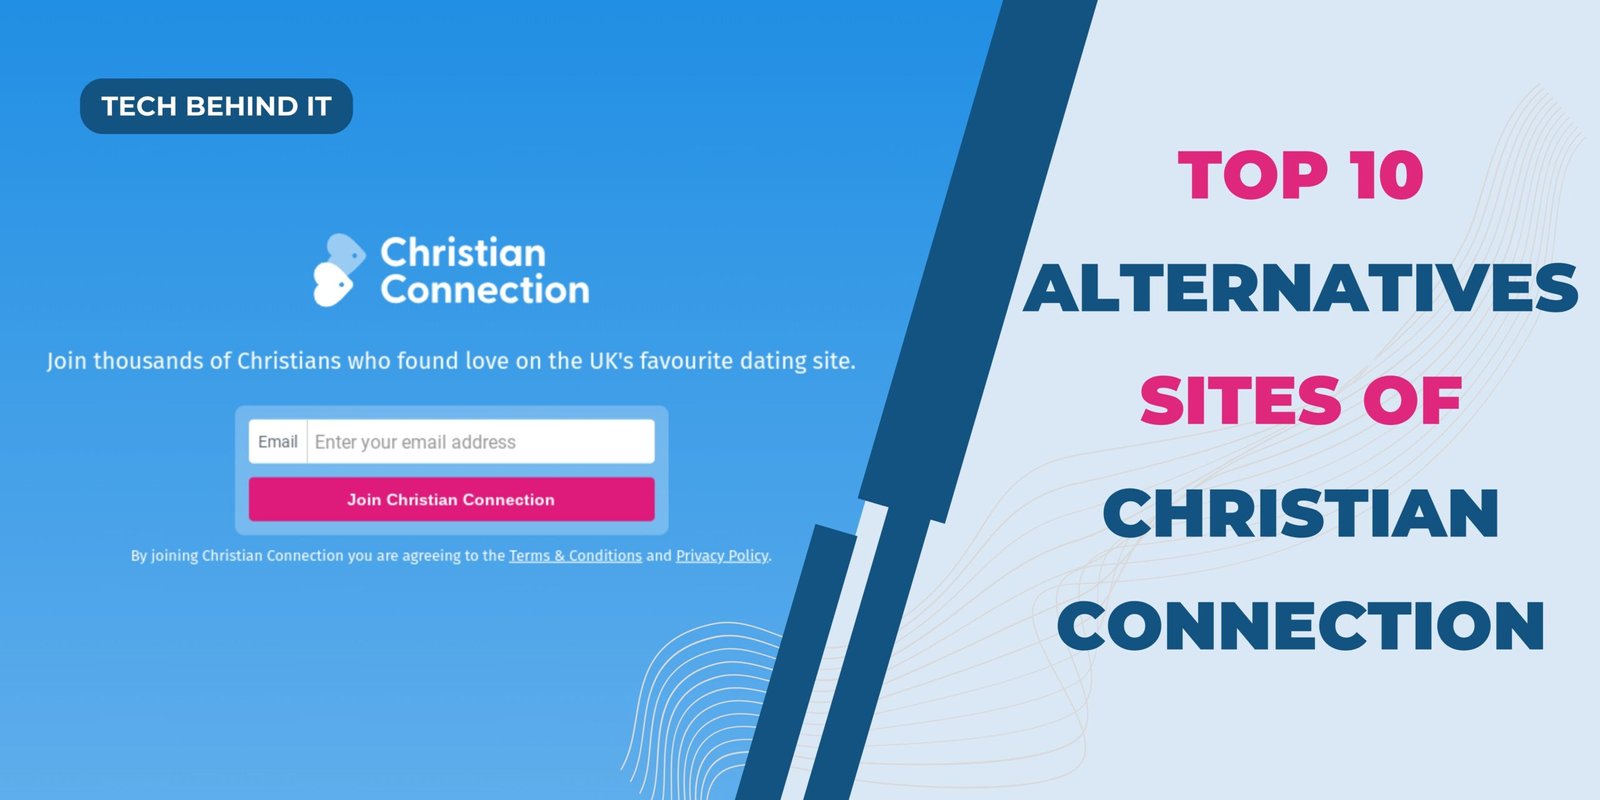 Top 10 Alternatives Sites of Christian Connection